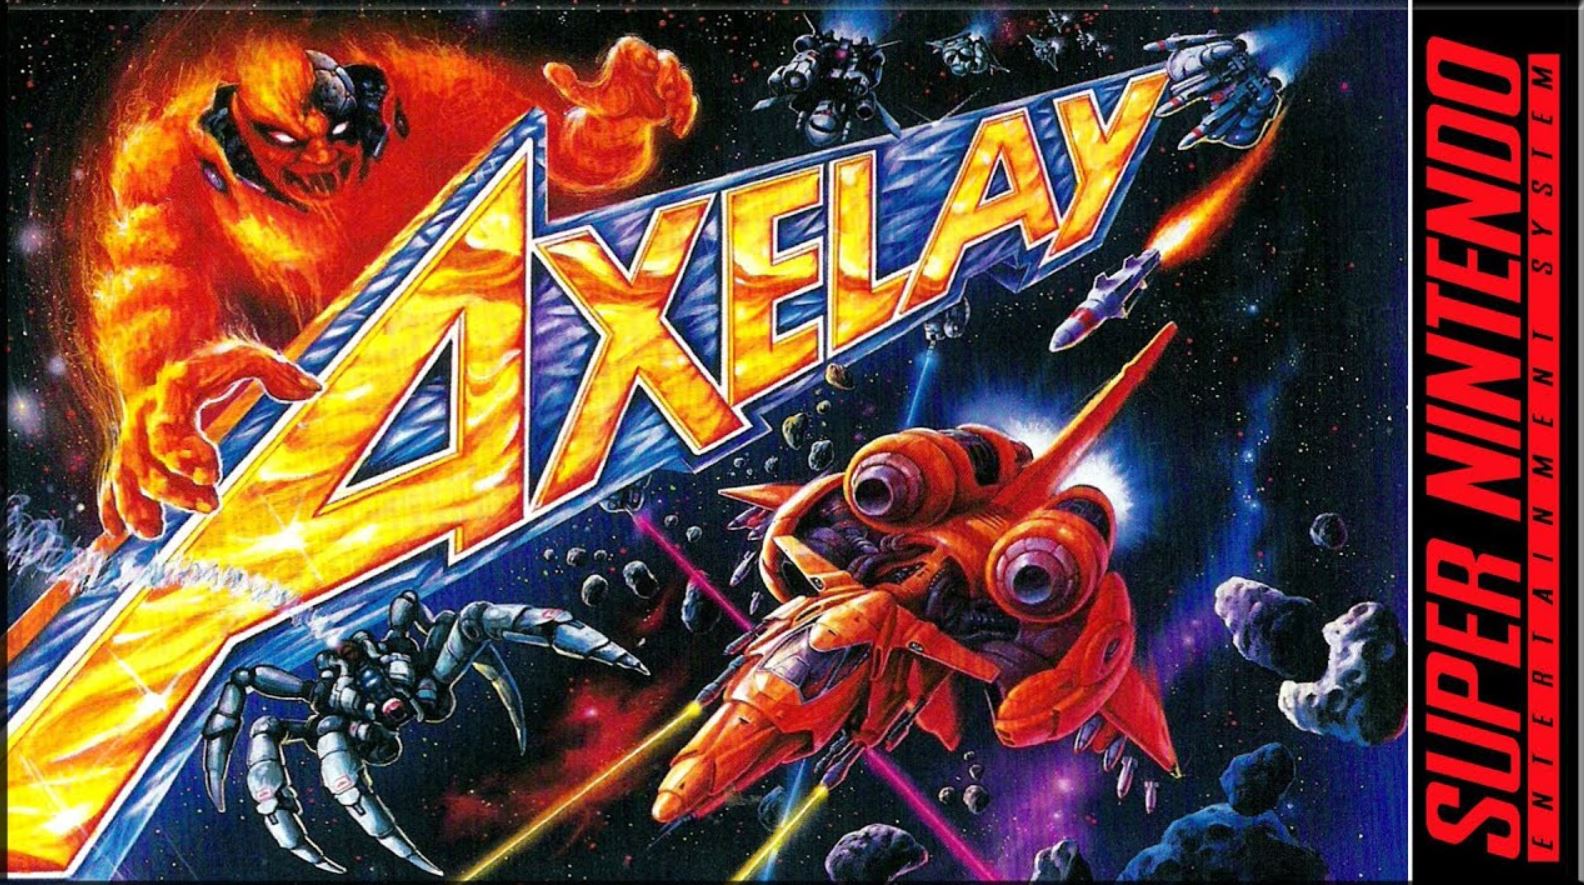 Awesome Axeley wallpaper old classic game